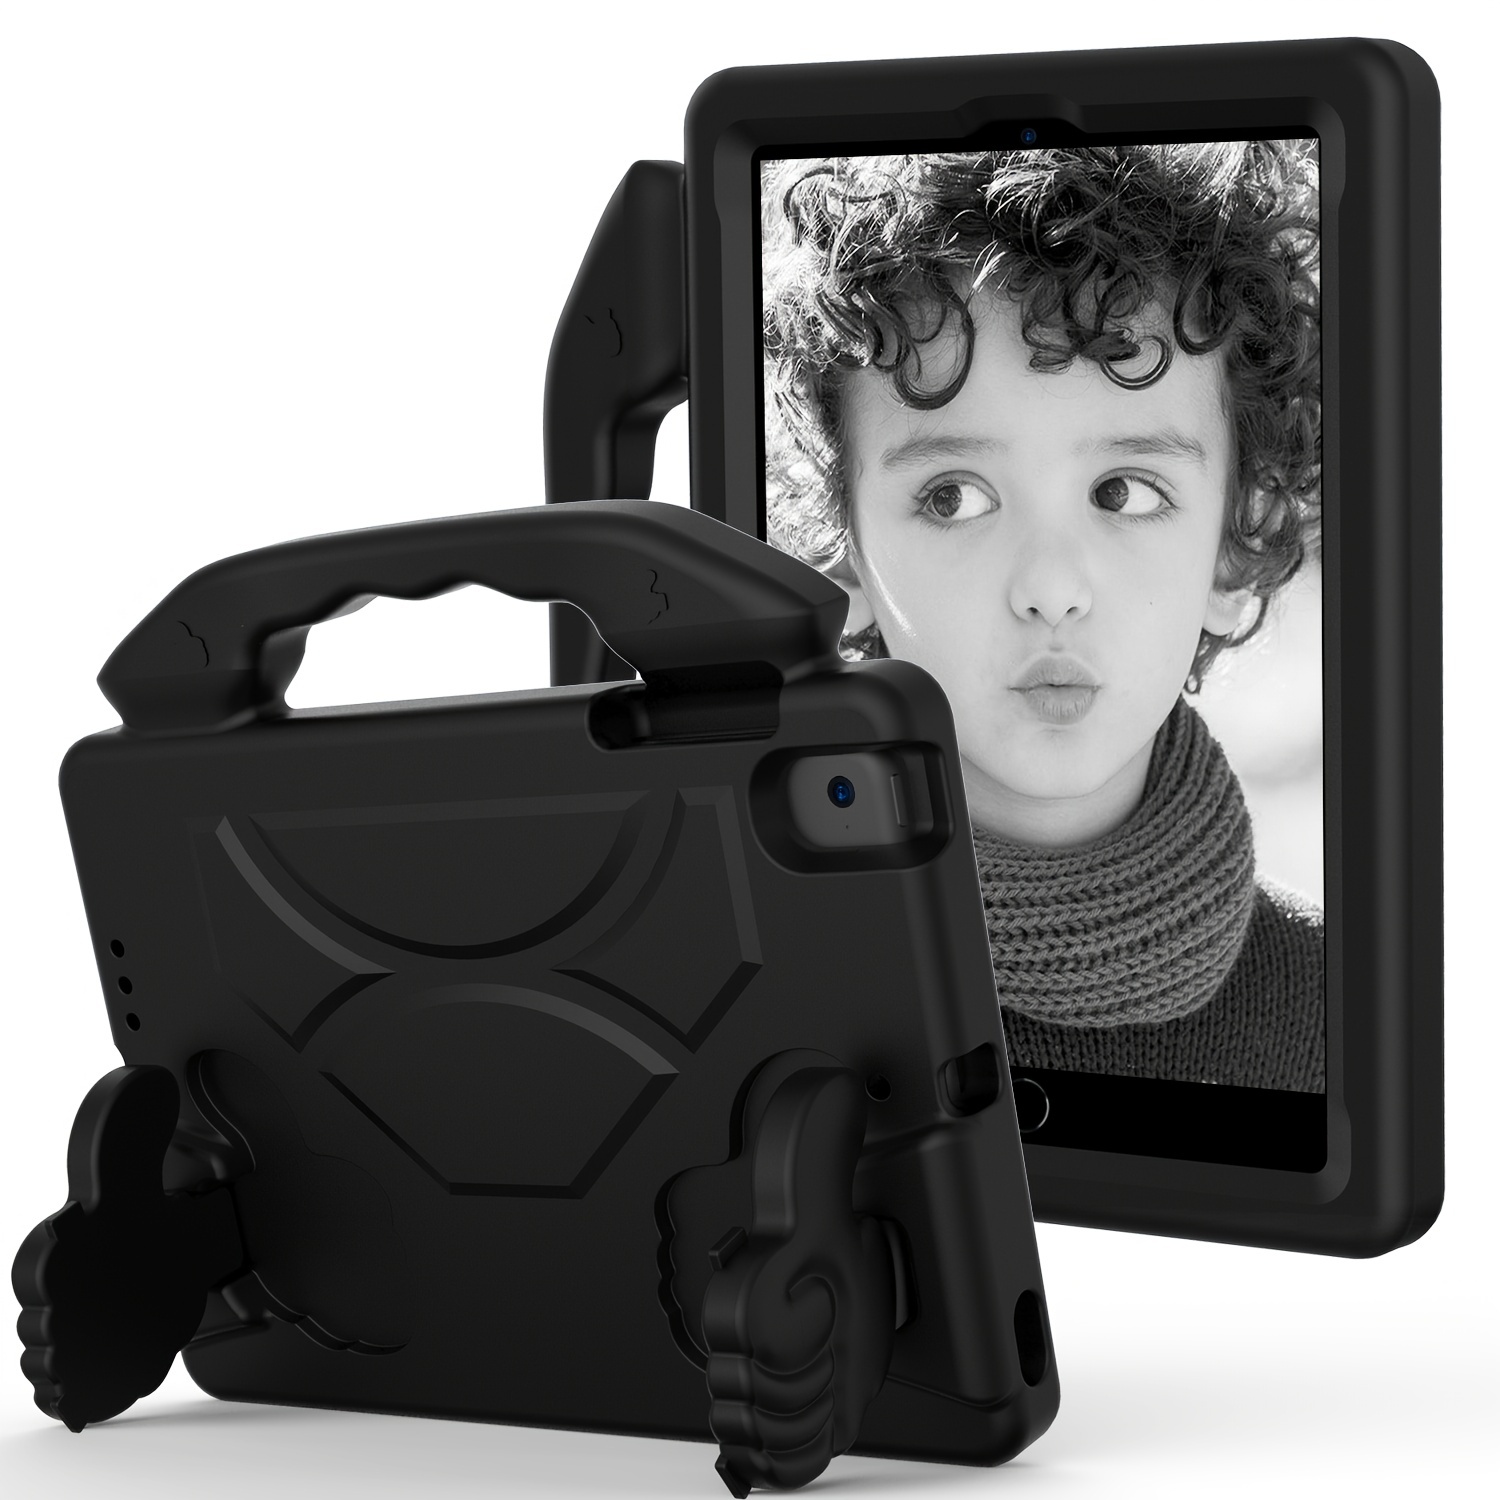 Heavy Duty Shockproof Tablet Case With Durable EVA Drop Protection